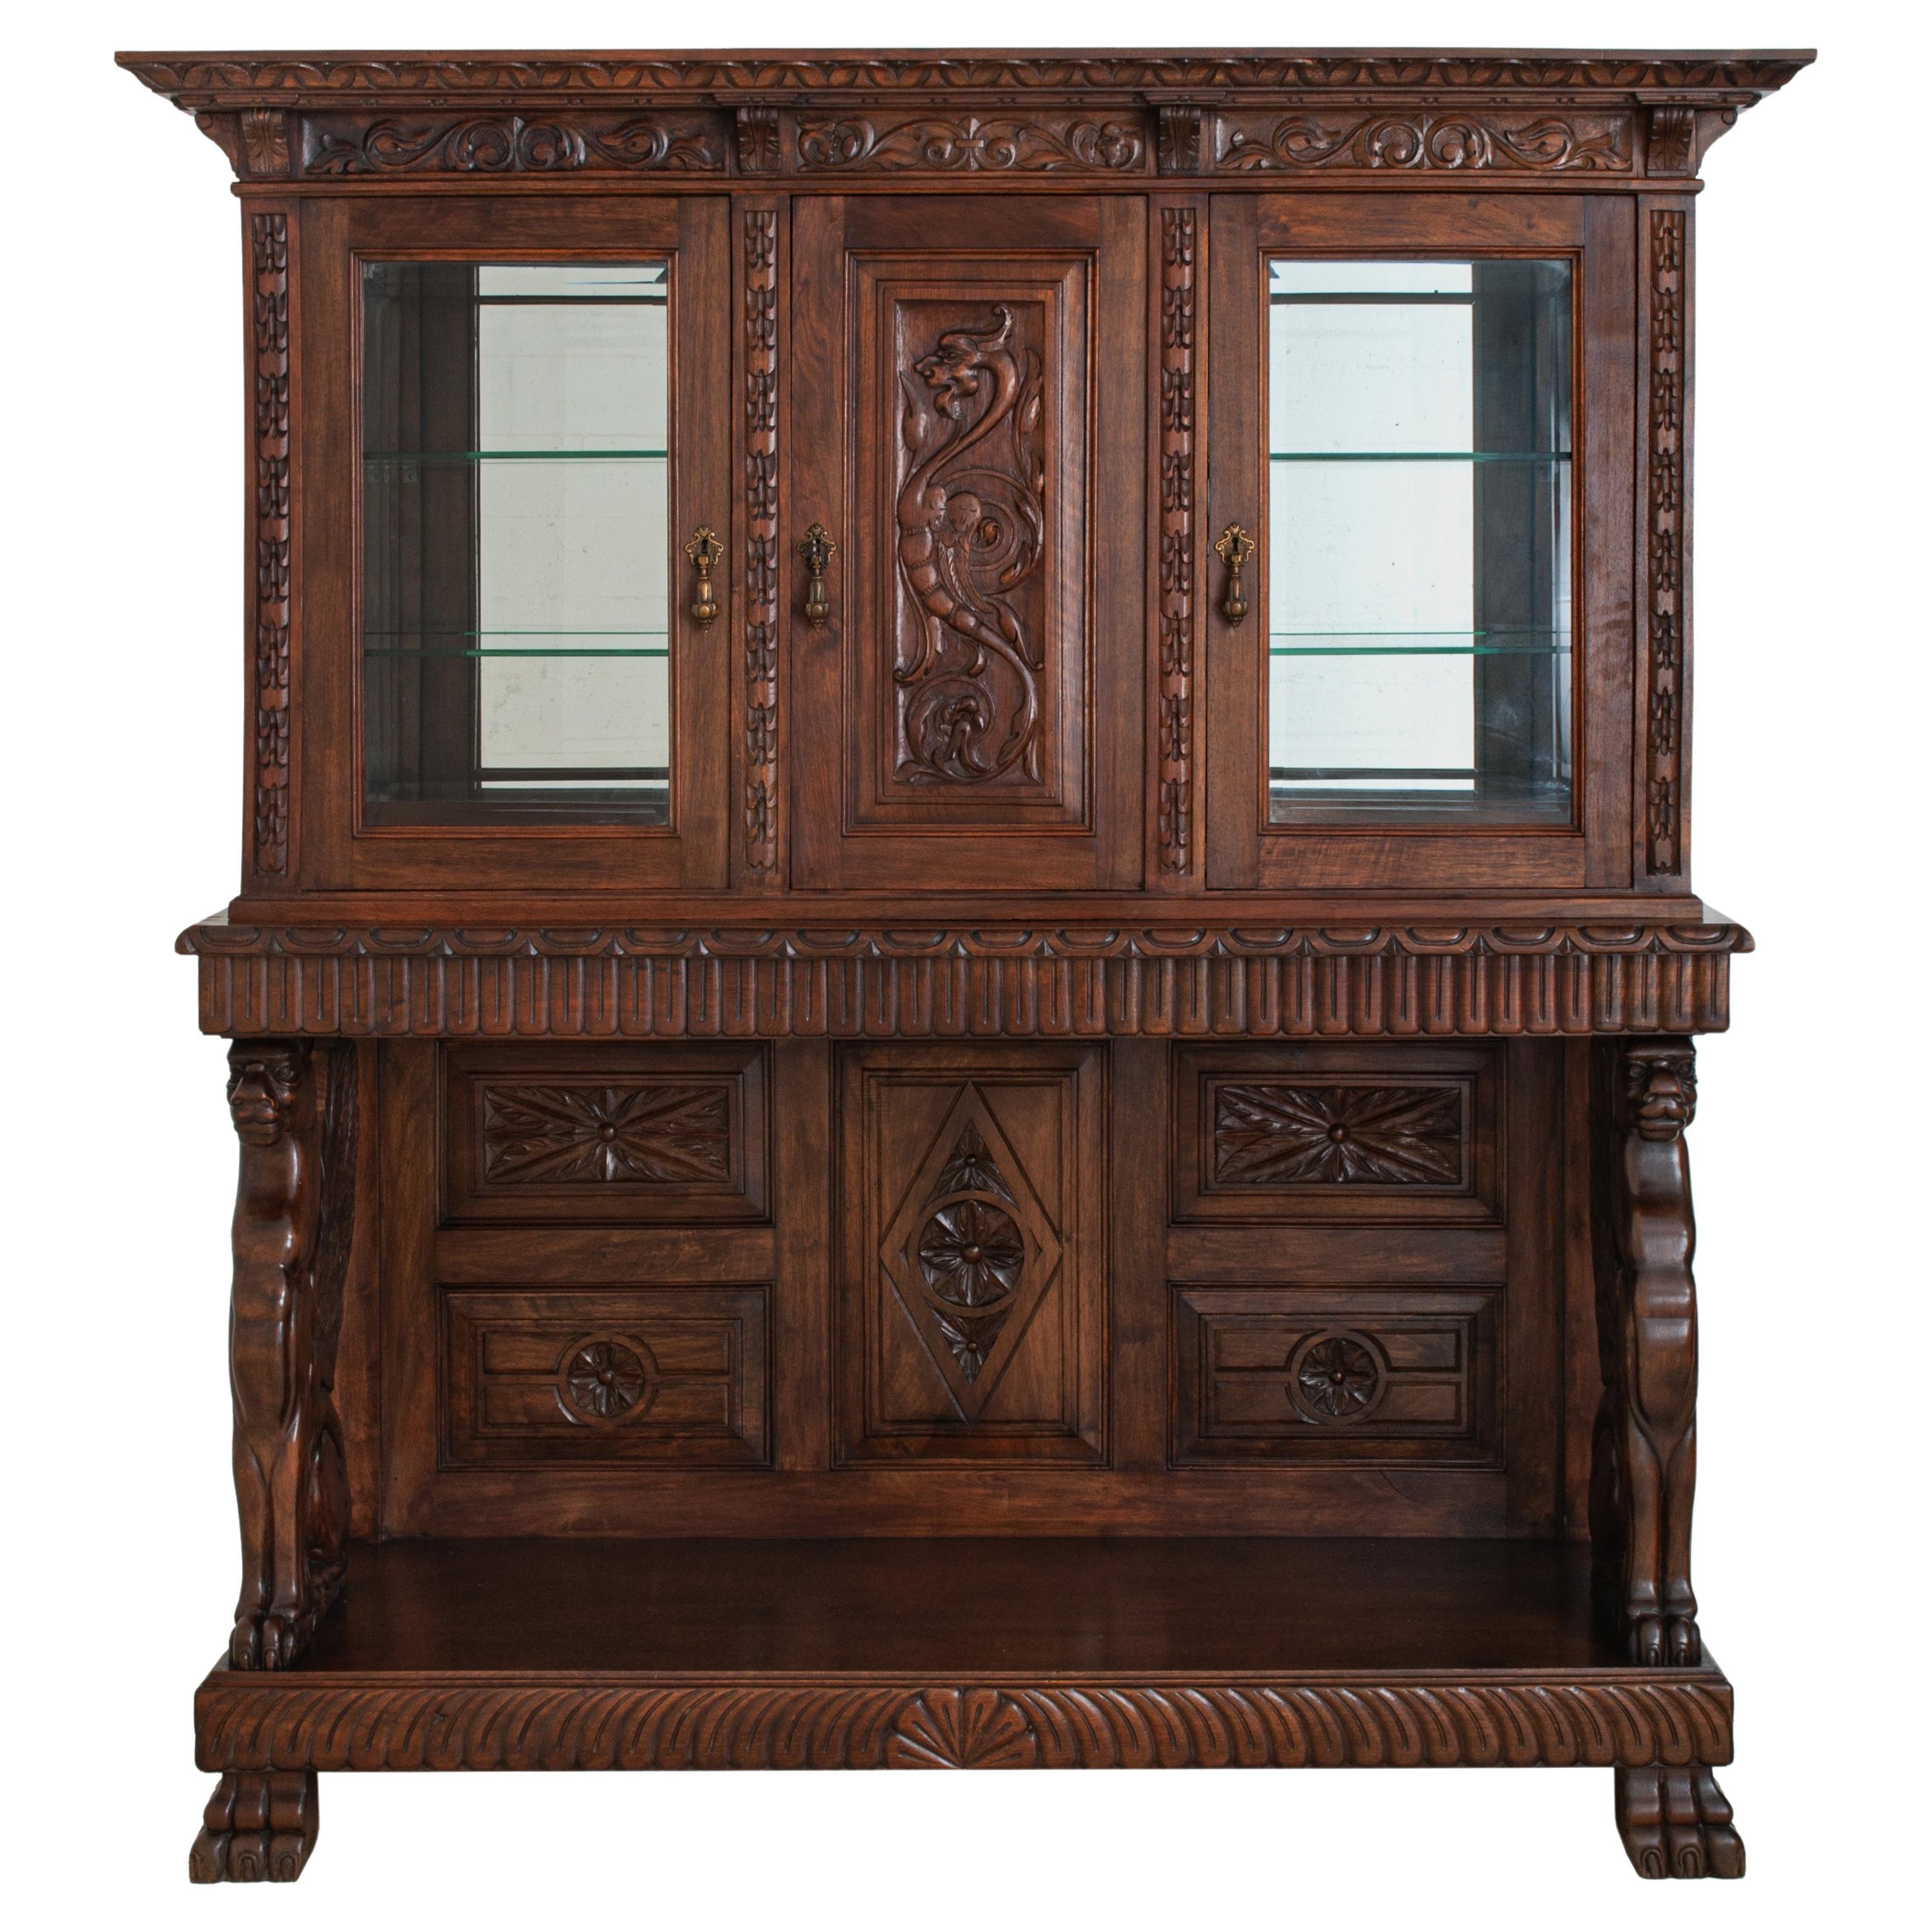 A very good, carved, Italian, Renaissance Revival 'Griffin' display cabinet, buffet, circa 1890.
The cabinet in two sections & having a heavily carved cornice supported with carved brackets. Below are three doors, the center door with a carved